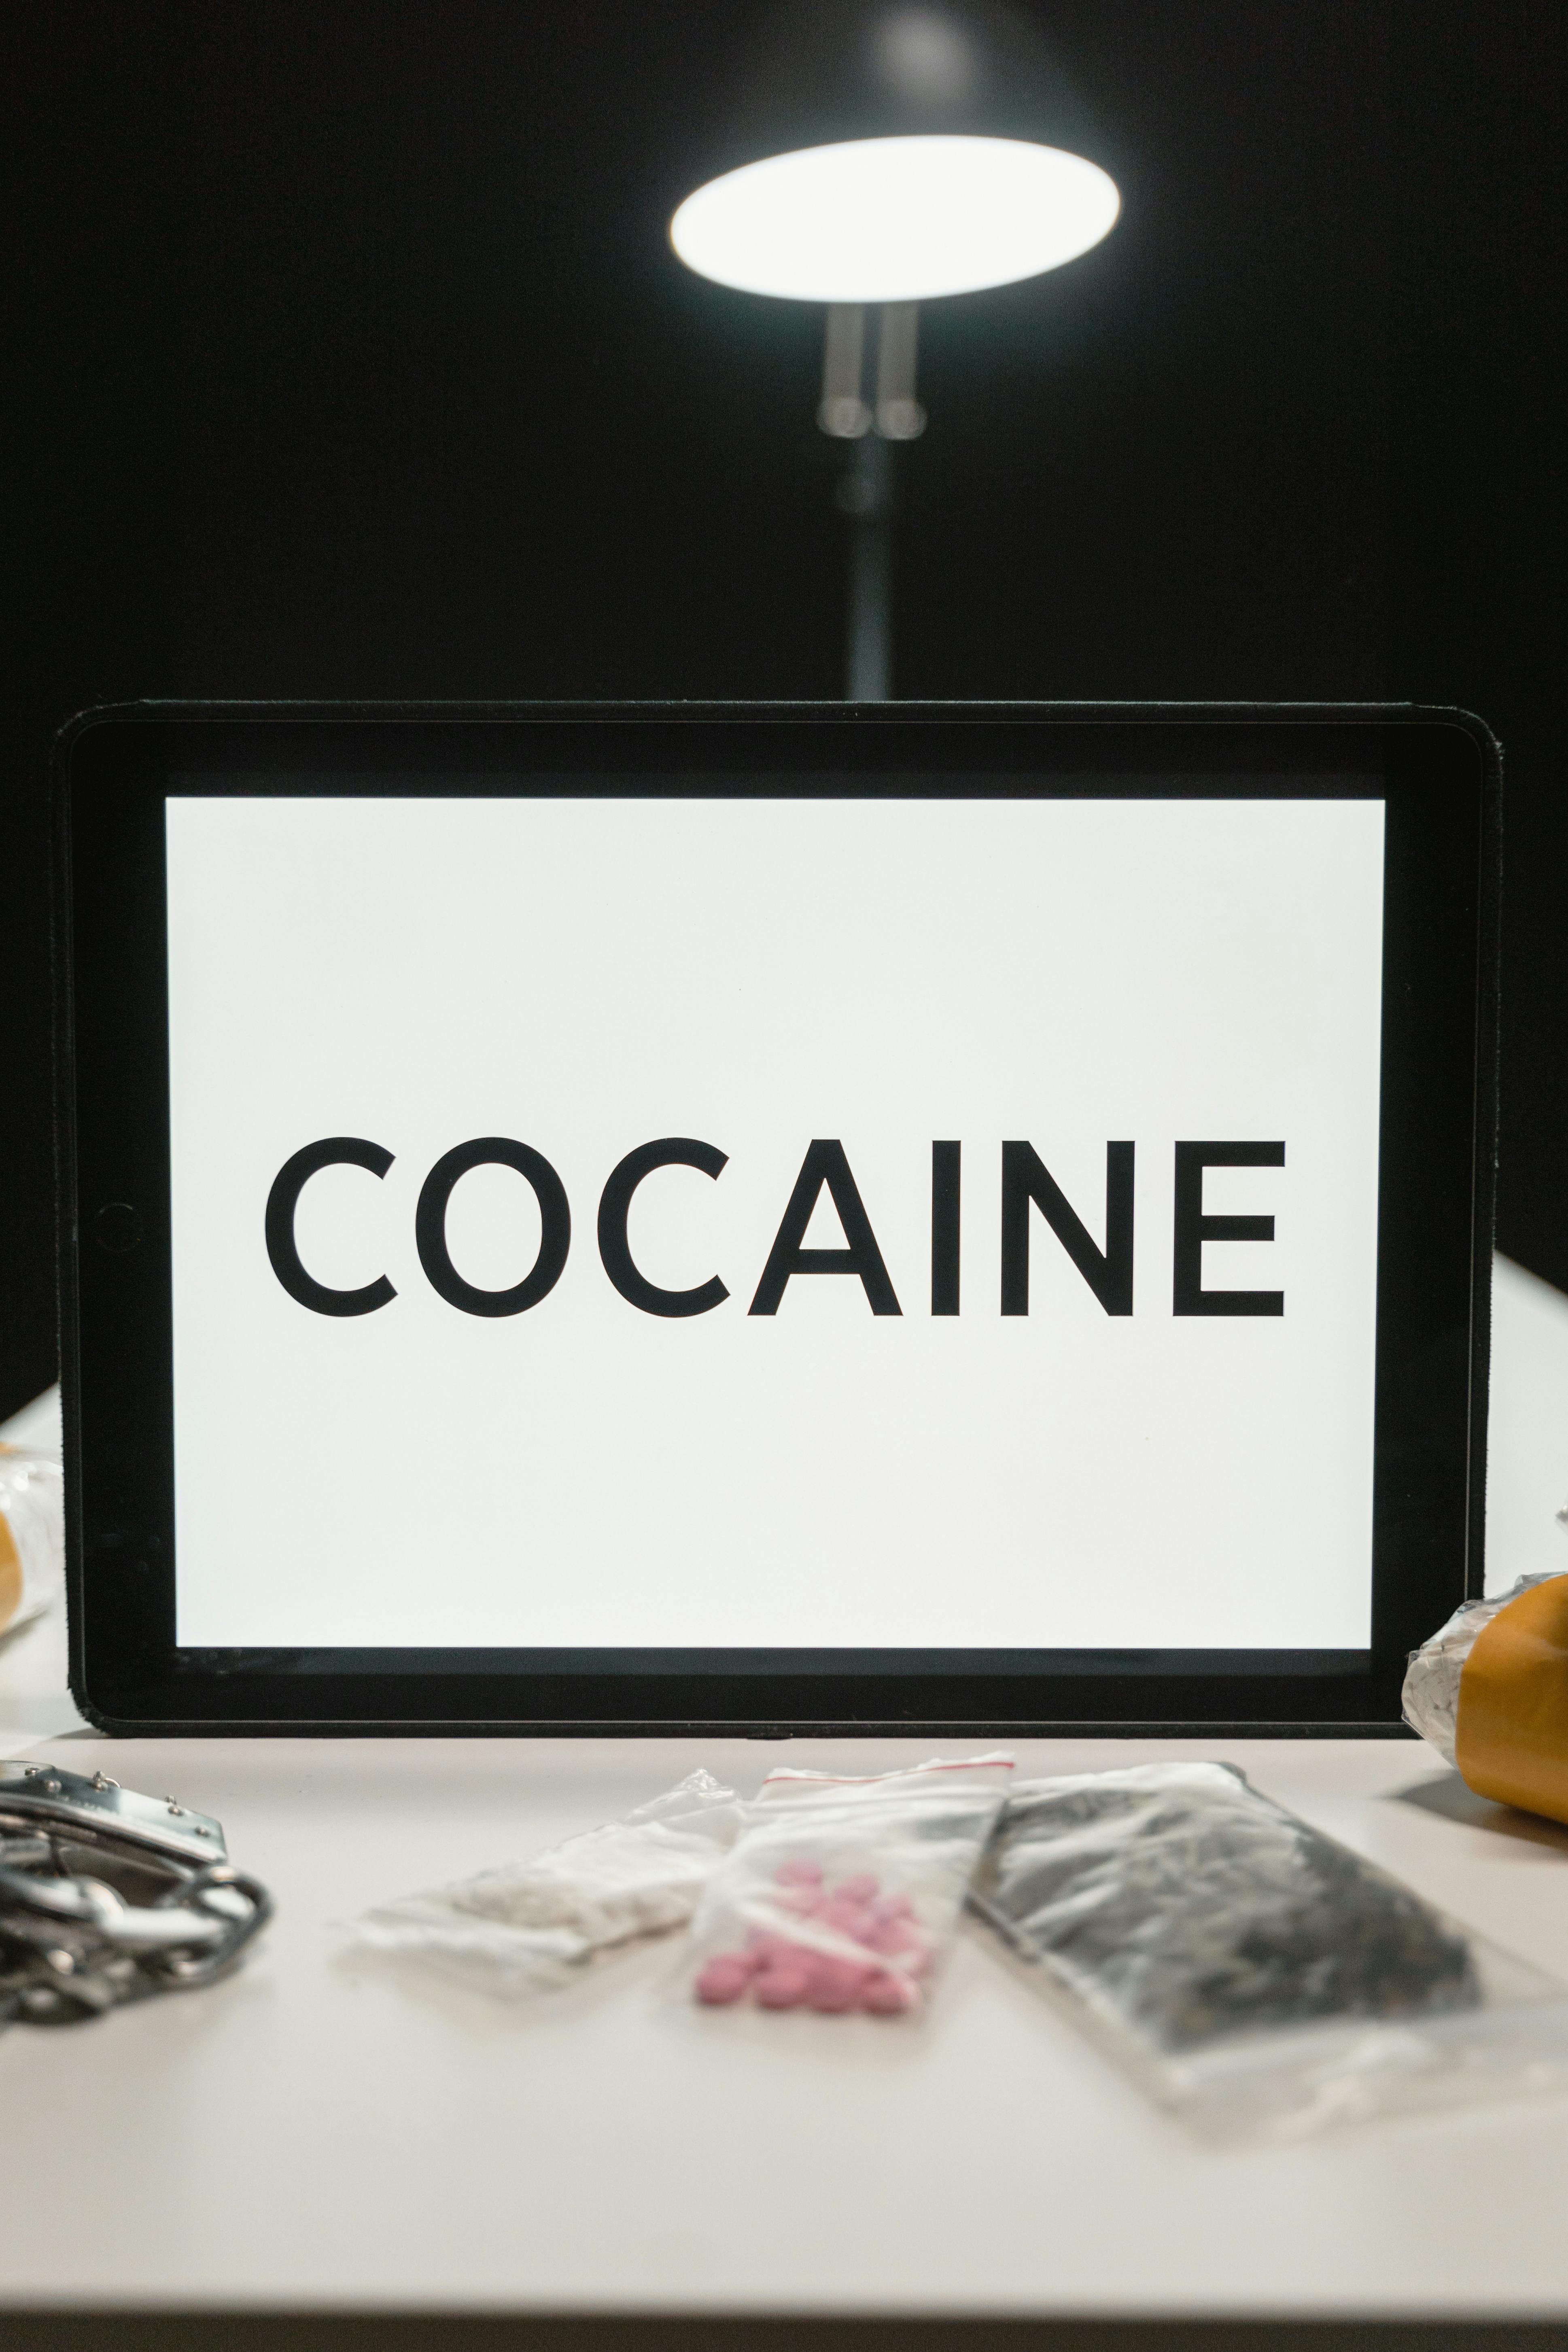 Cocaine Photos, Download The BEST Free Cocaine Stock Photos & HD Images